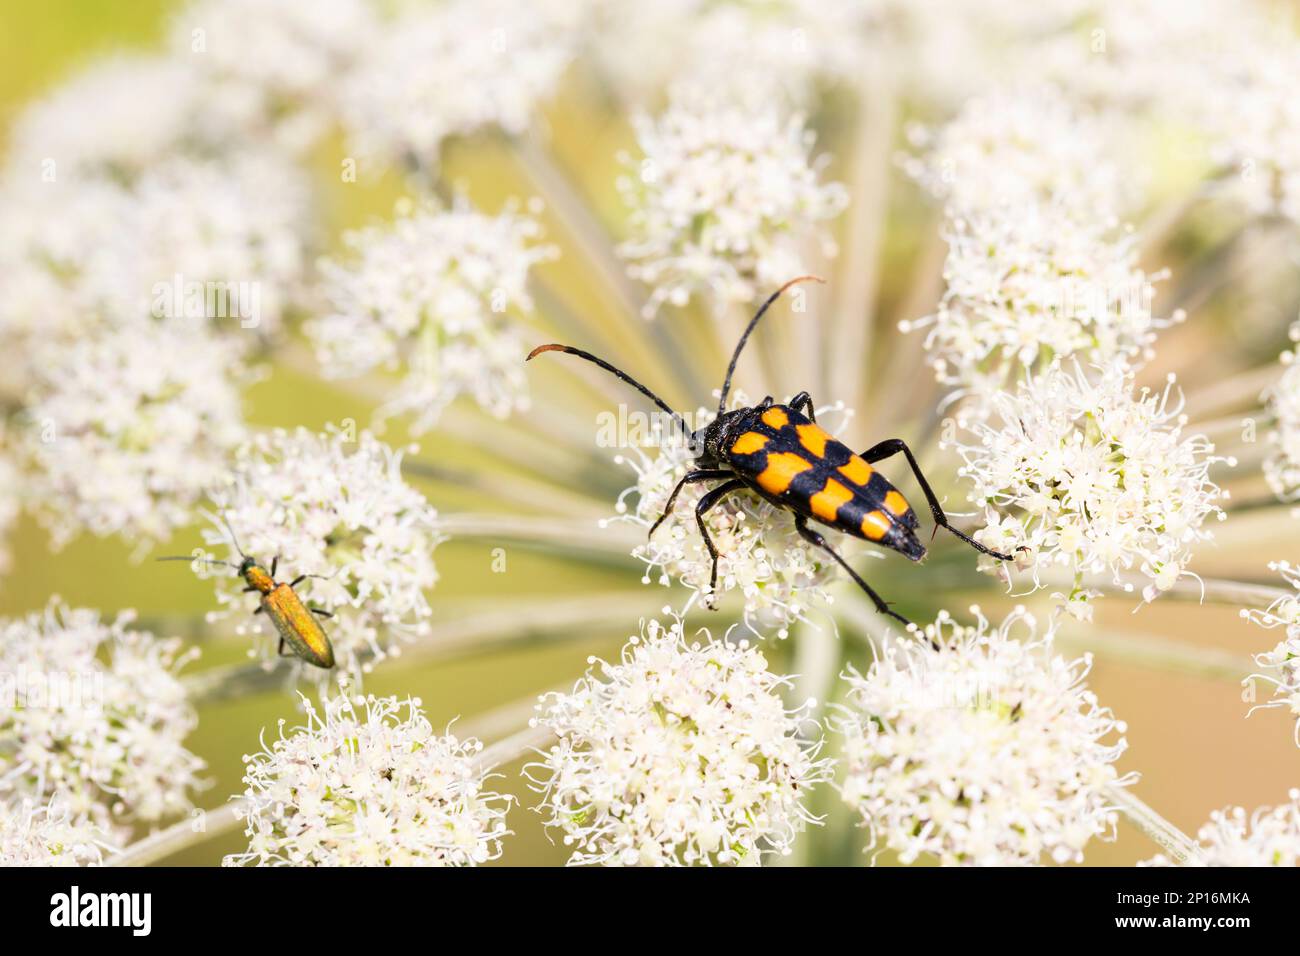 Closeup on a Spotted longhorn beetle, Leptura maculata on the white flower of a Wild carrot, Daucus carota. Stock Photo